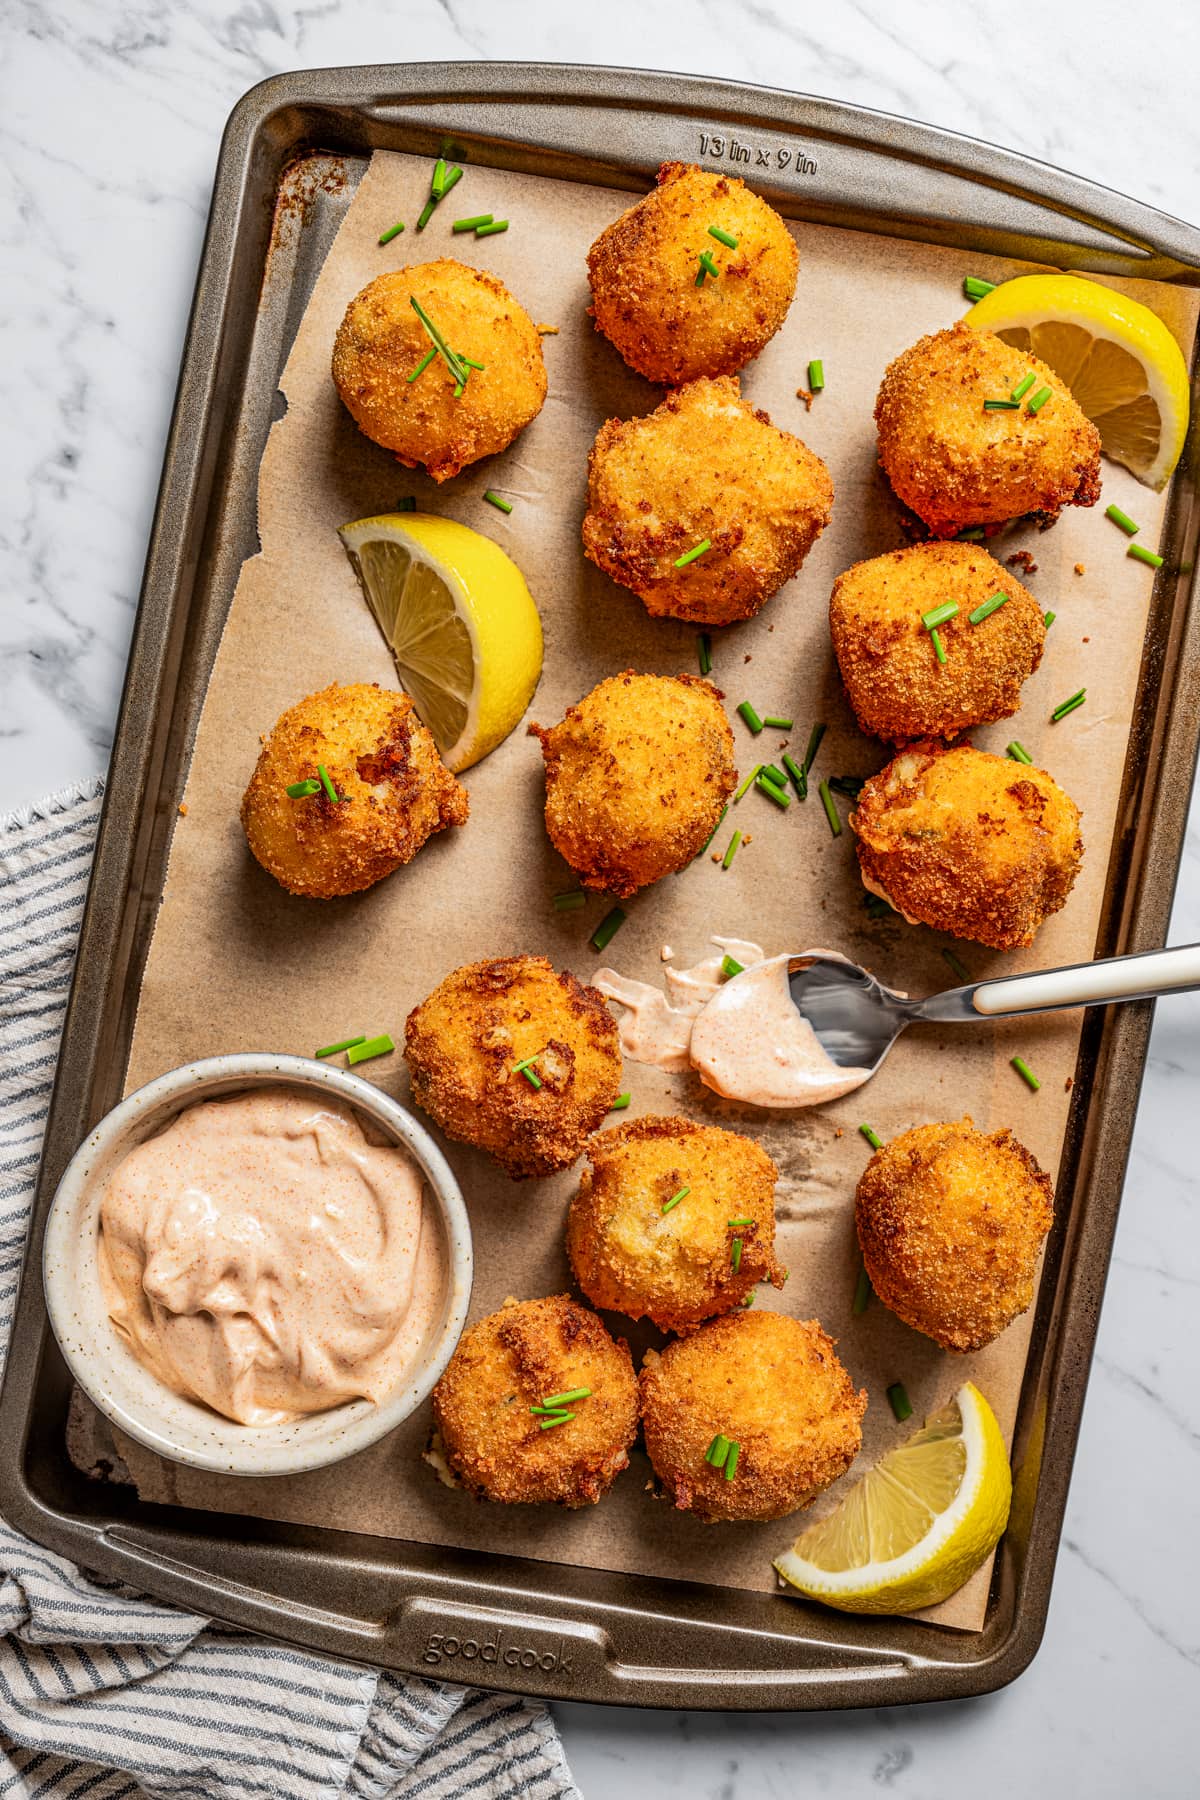 Potato croquettes on a baking sheet lined with parchment paper with a bowl of garlic aioli.